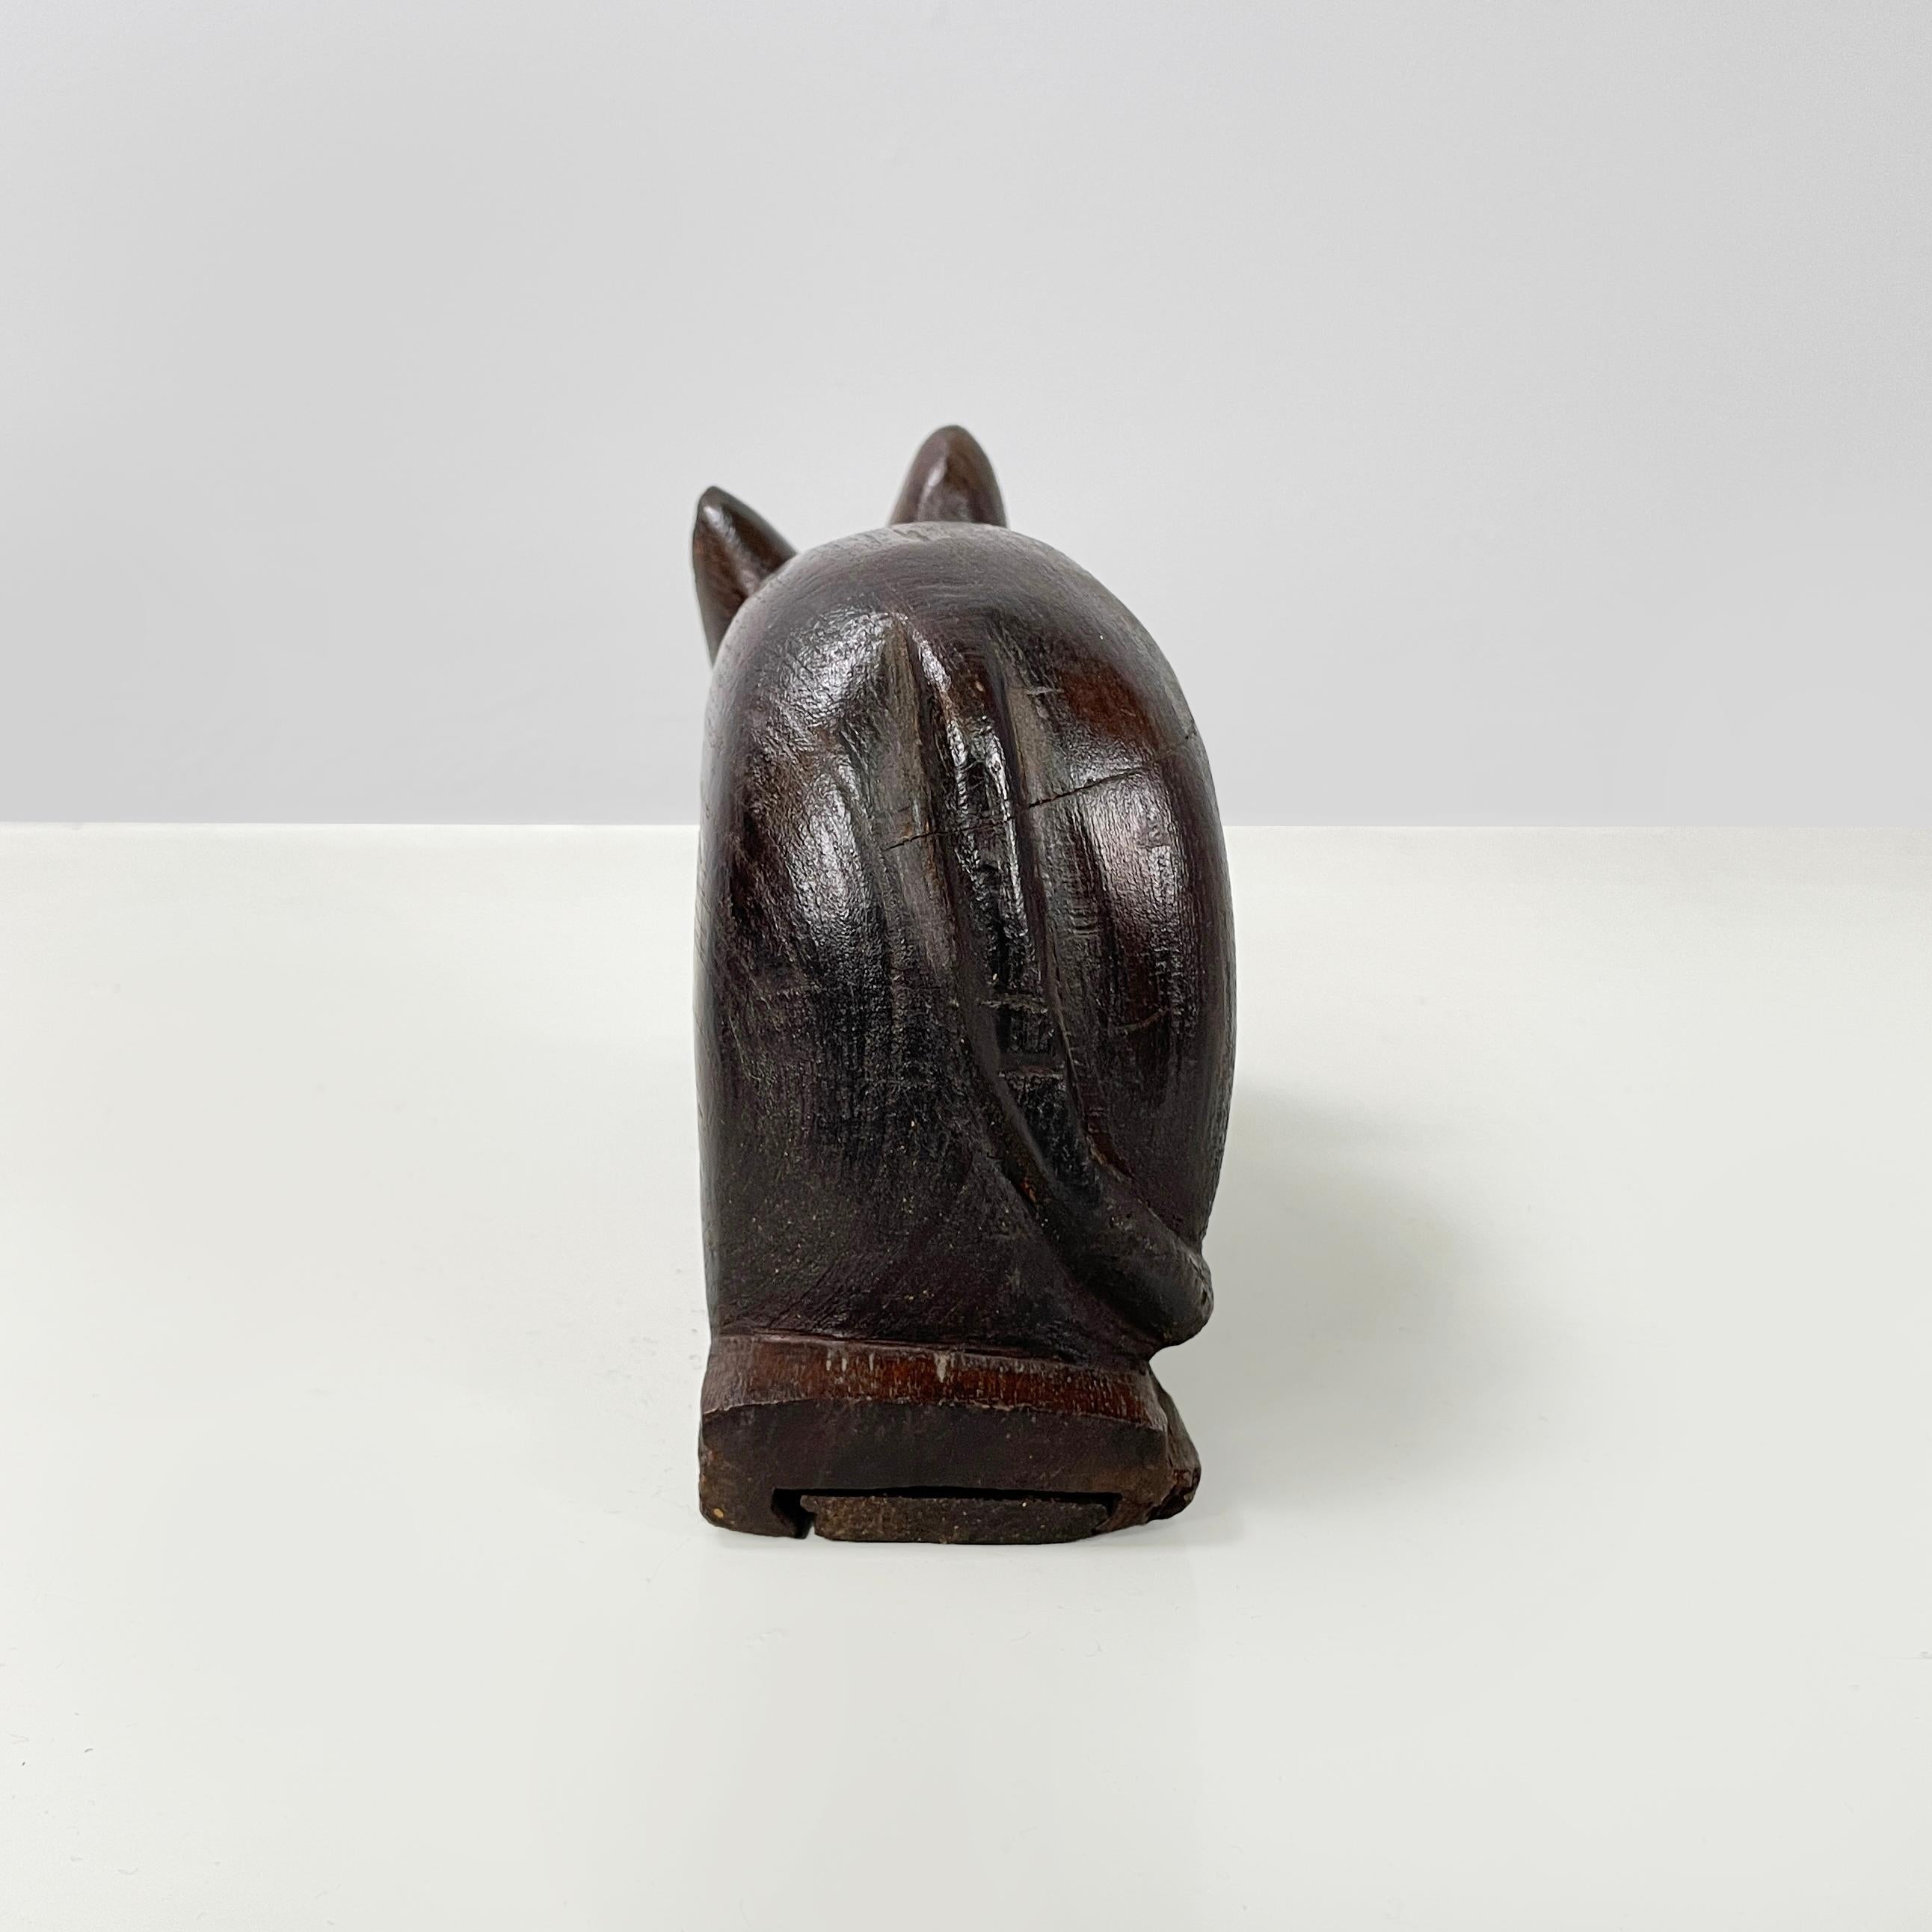 Early 20th Century Chinese antique Wooden cat jewelry box or object holder, 1920s For Sale